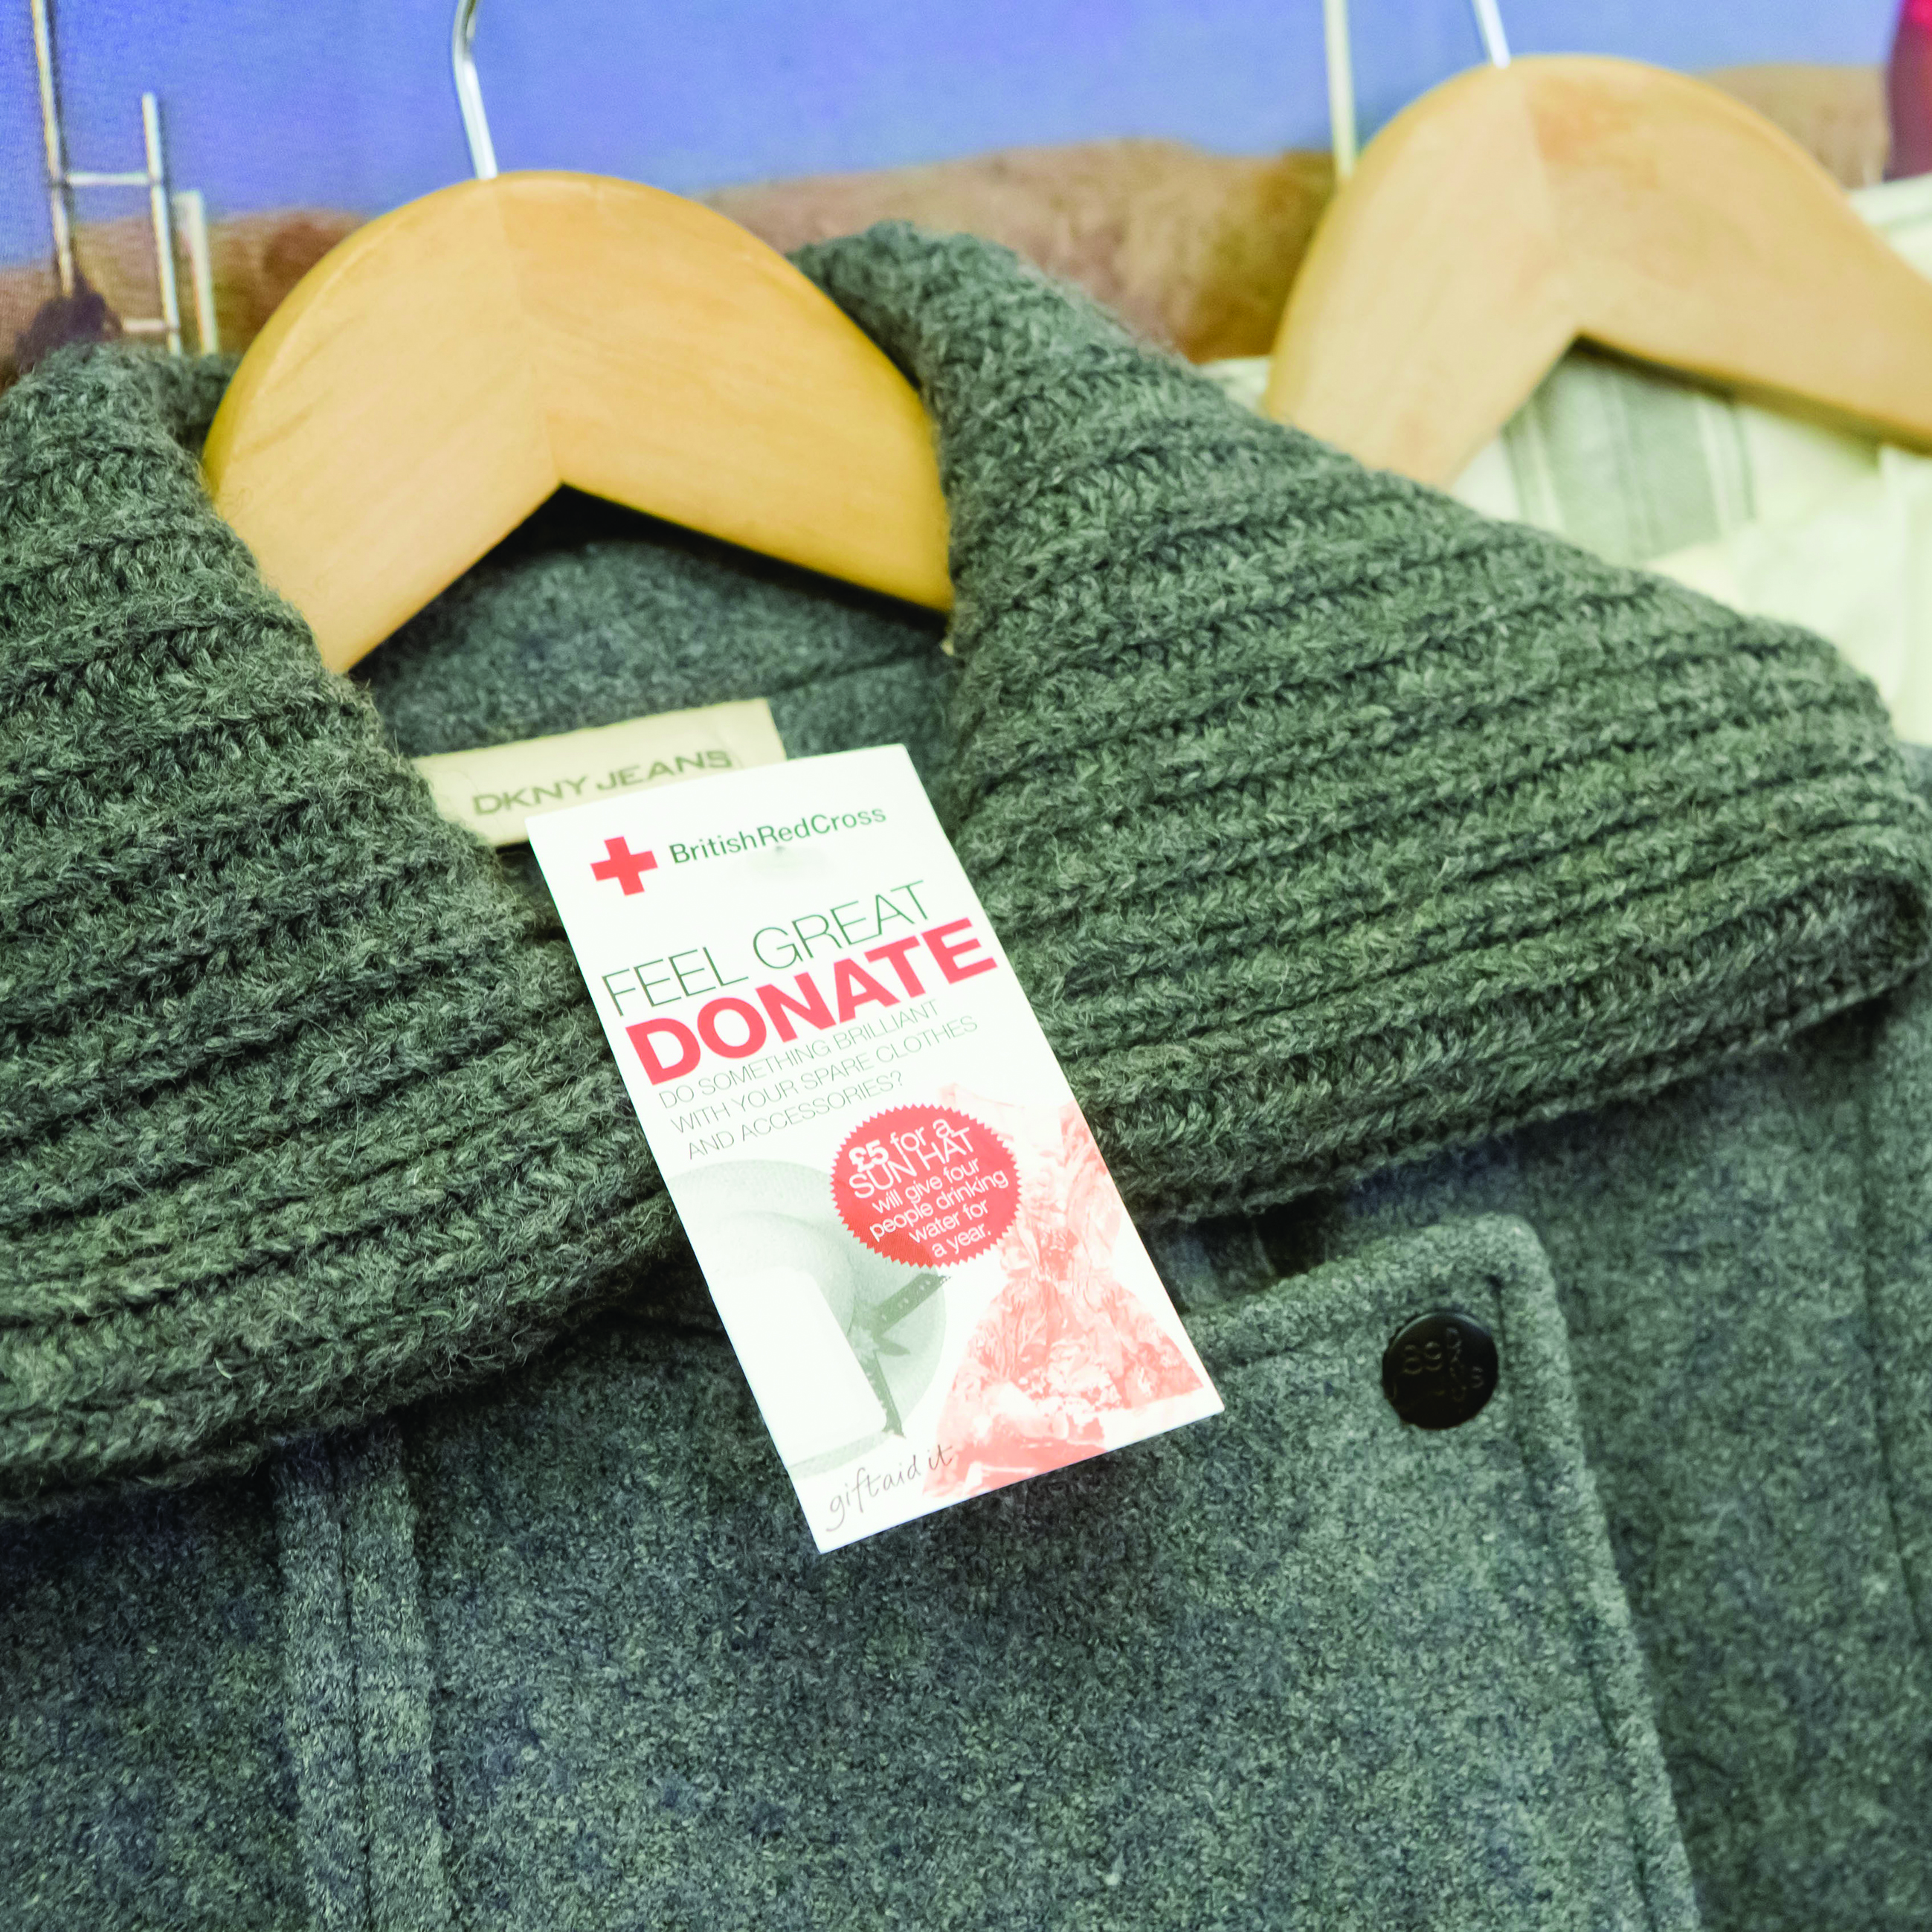 Best local places to donate your preloved items this January